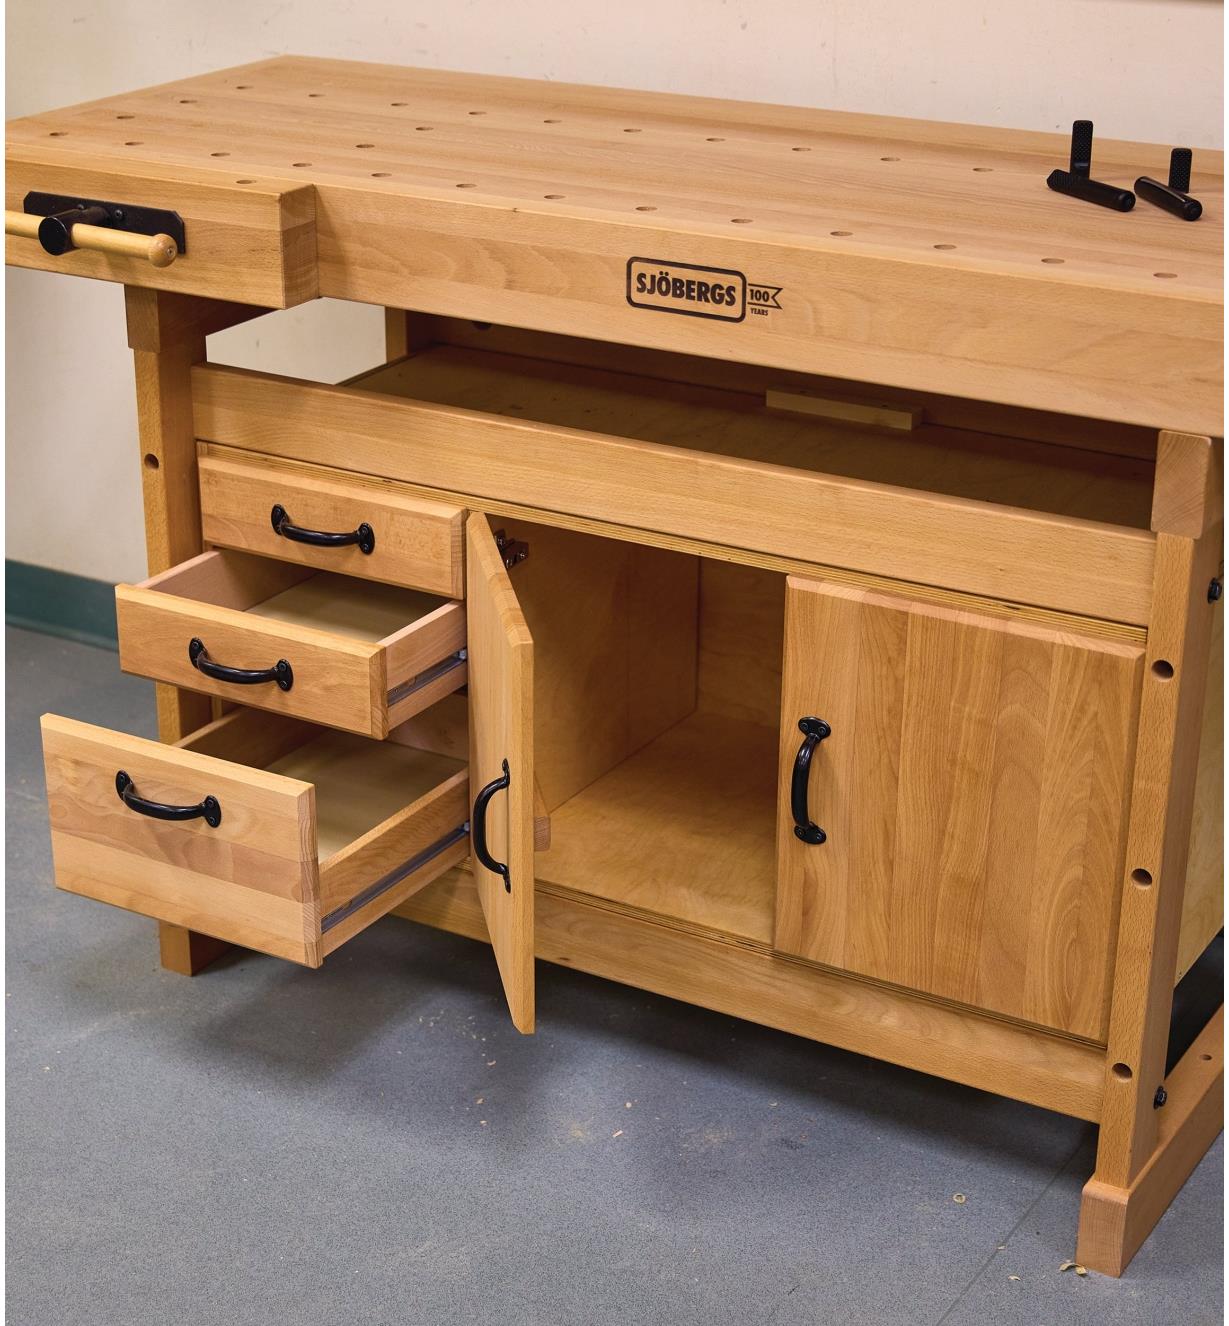 A workbench and storage module with the drawers and cupboard open on the module